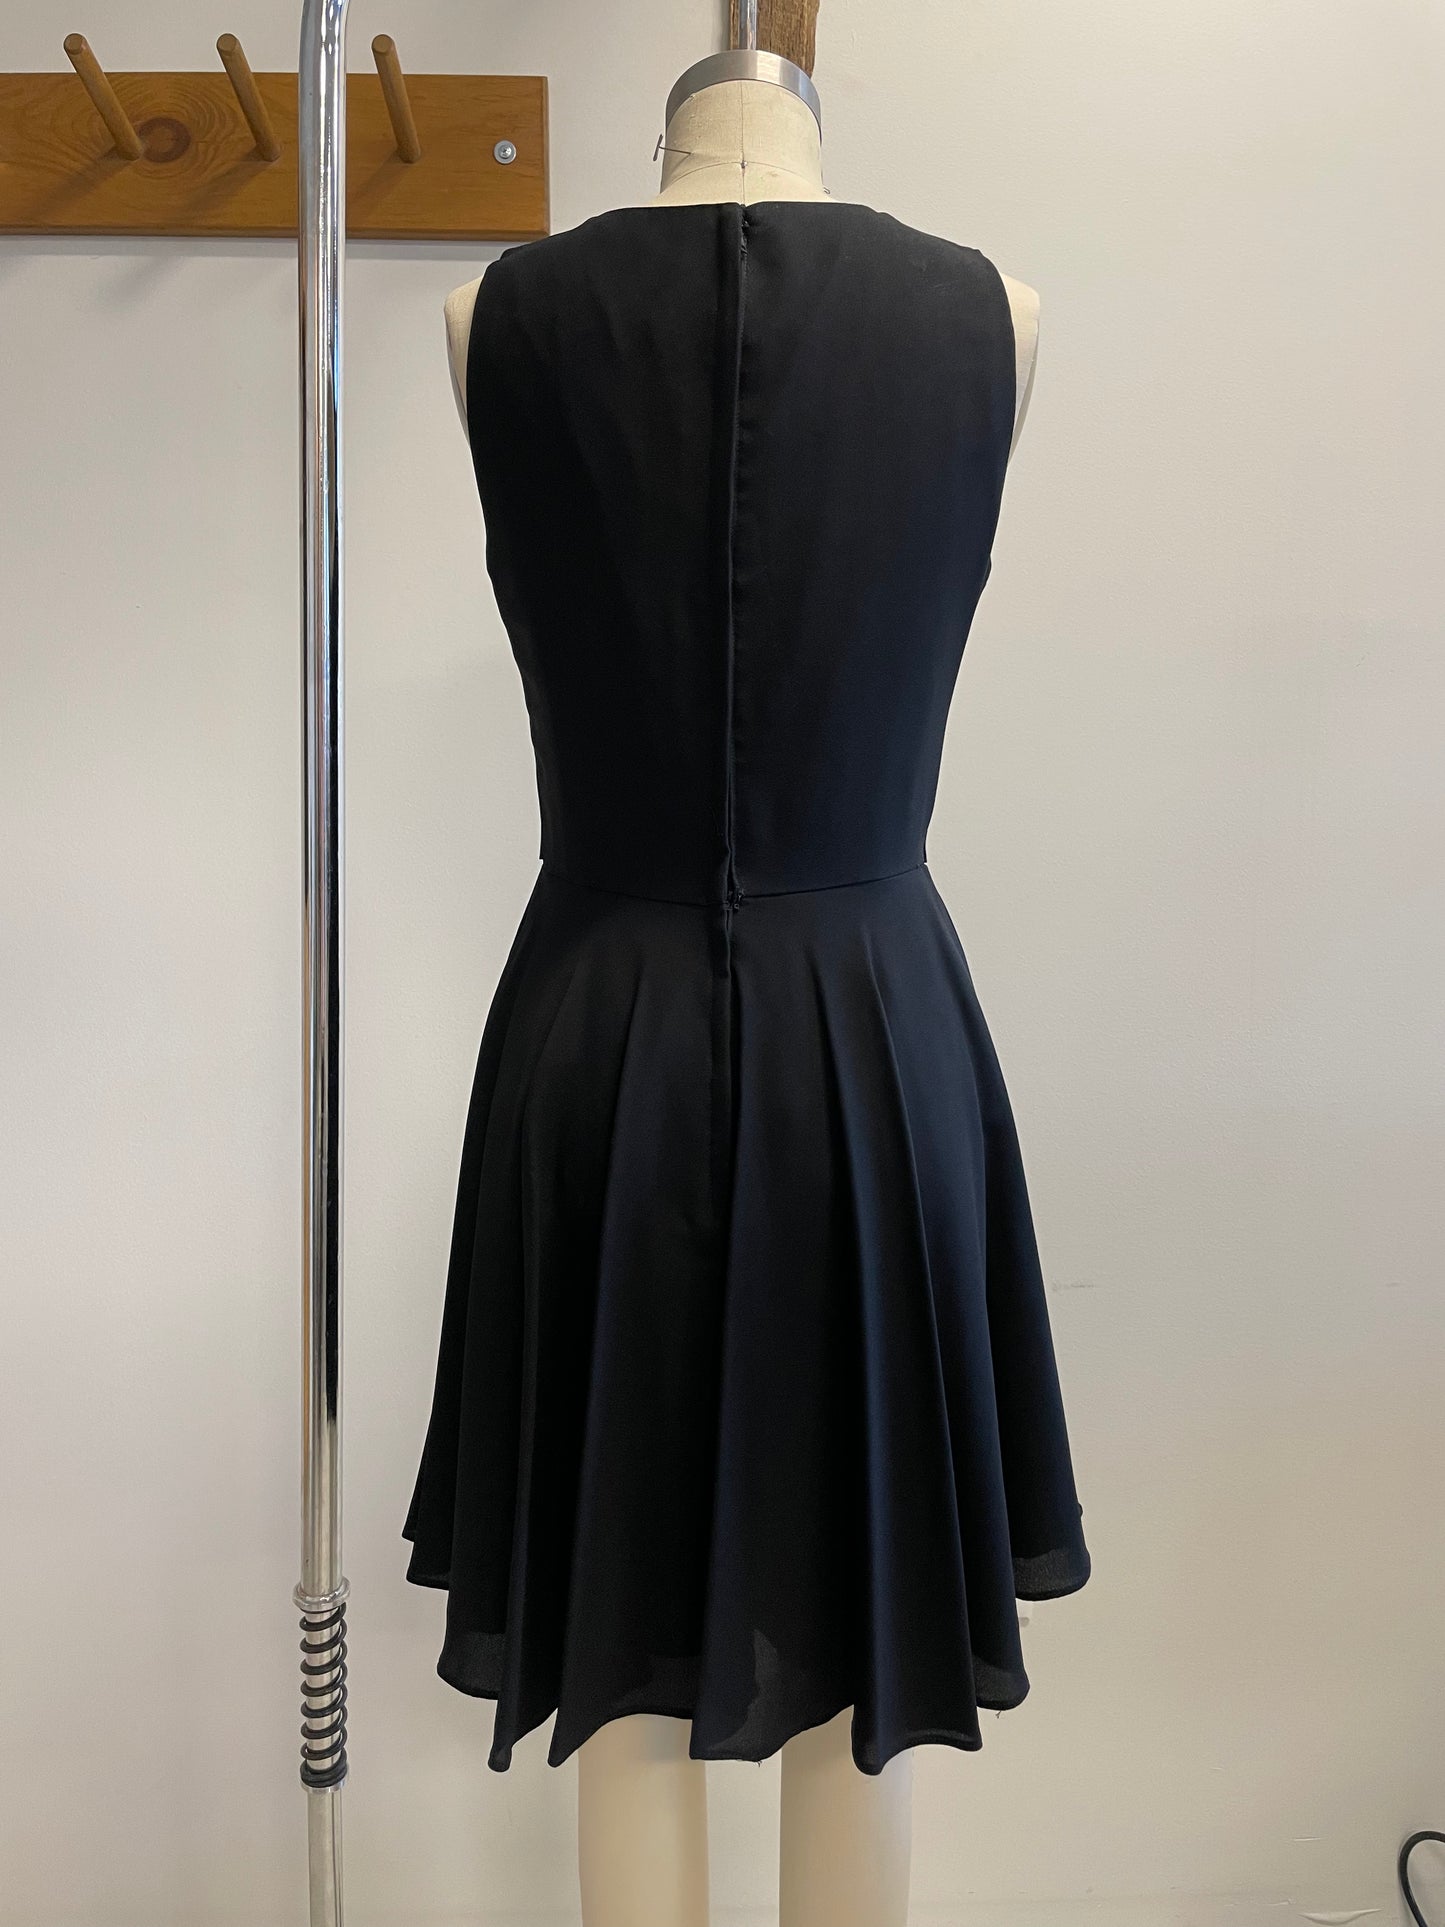 Vintage belted cocktail dress with buckle